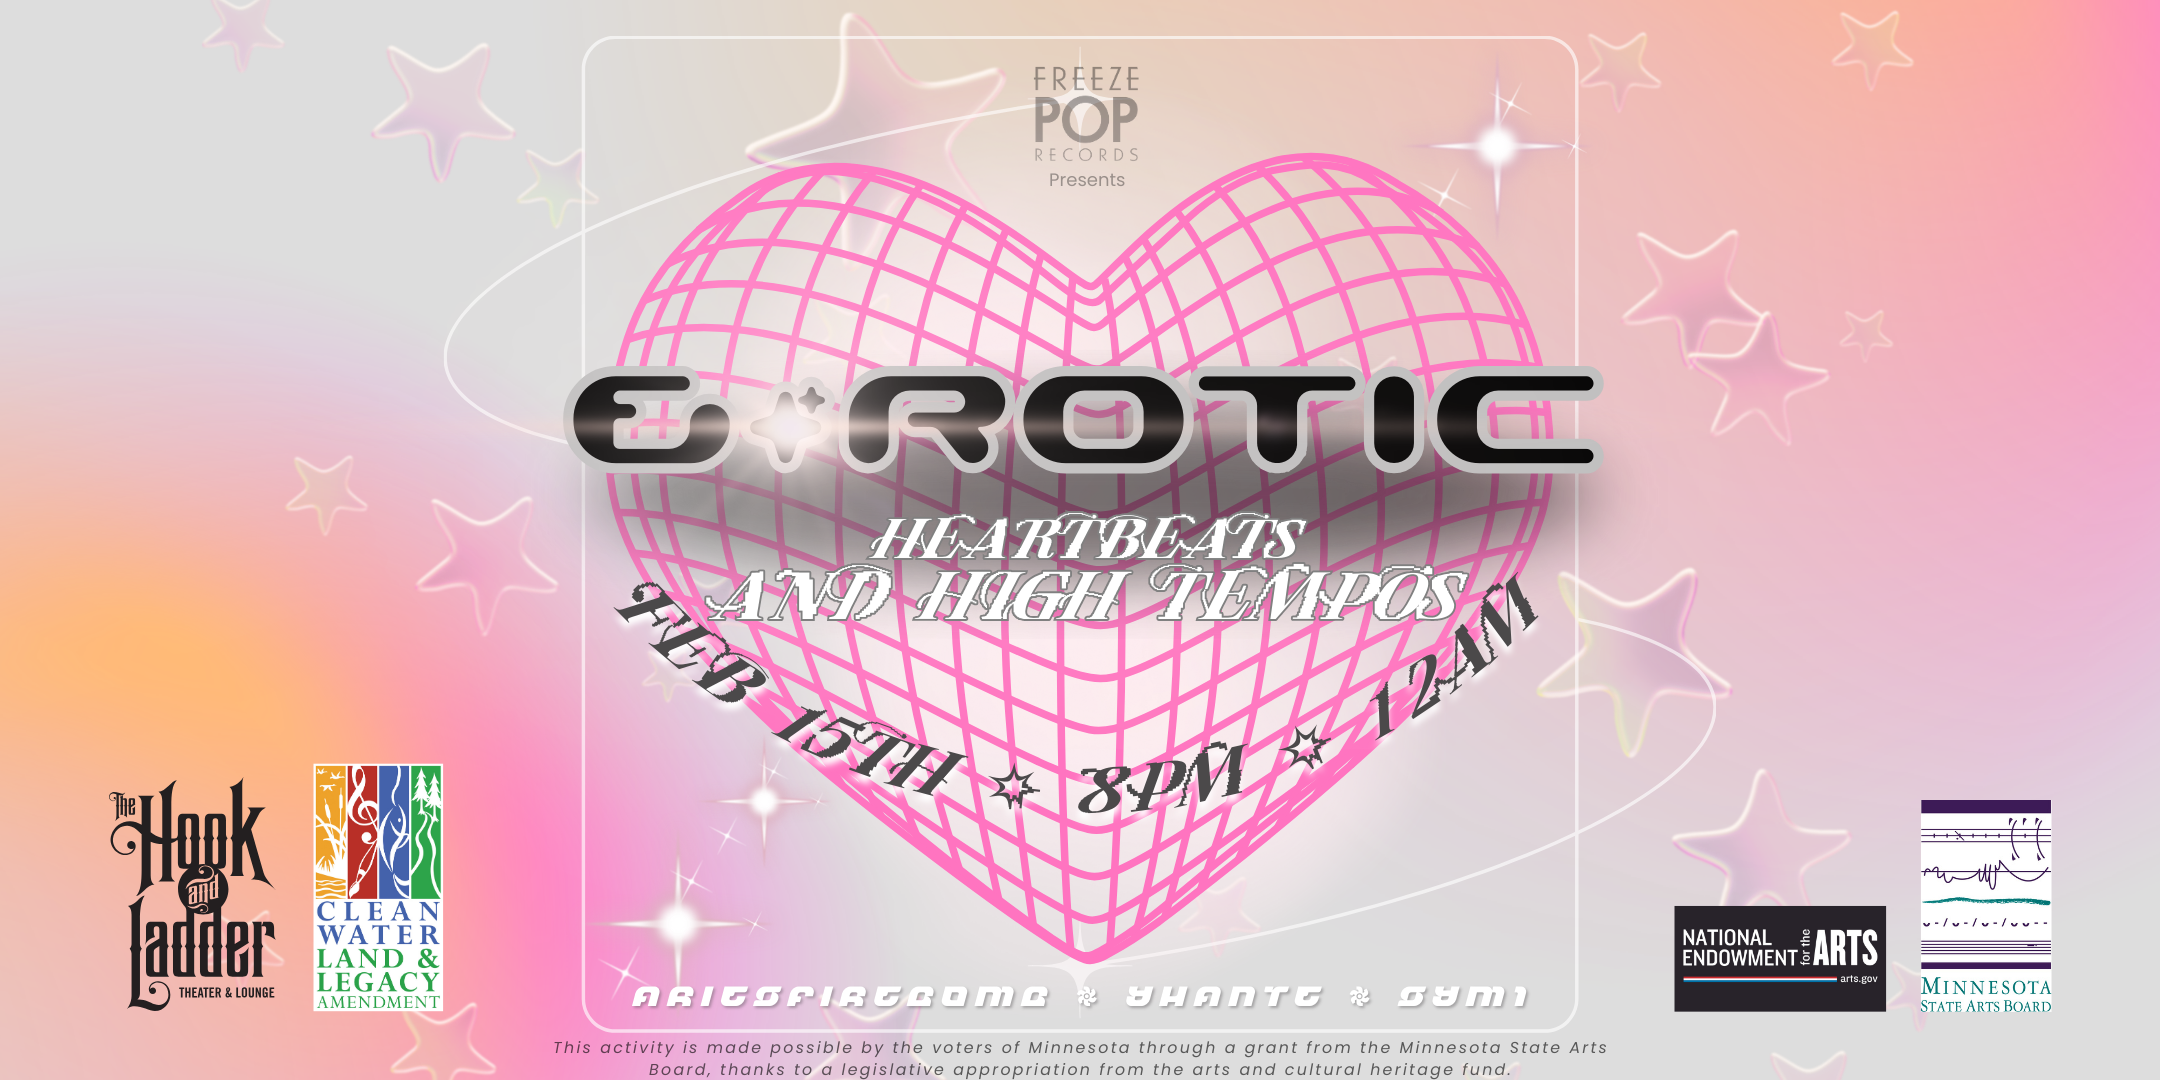 Freeze Pop Records Presents: E-rotic: Heartbeats & High Tempos with Ariesfirebomb, Yhante, and SYM1 Thursday, February 15 The Hook and Ladder Mission Room Doors 8:00pm :: Music 8:30pm :: 21+ General Admission: $10 ADV / $15 DOS